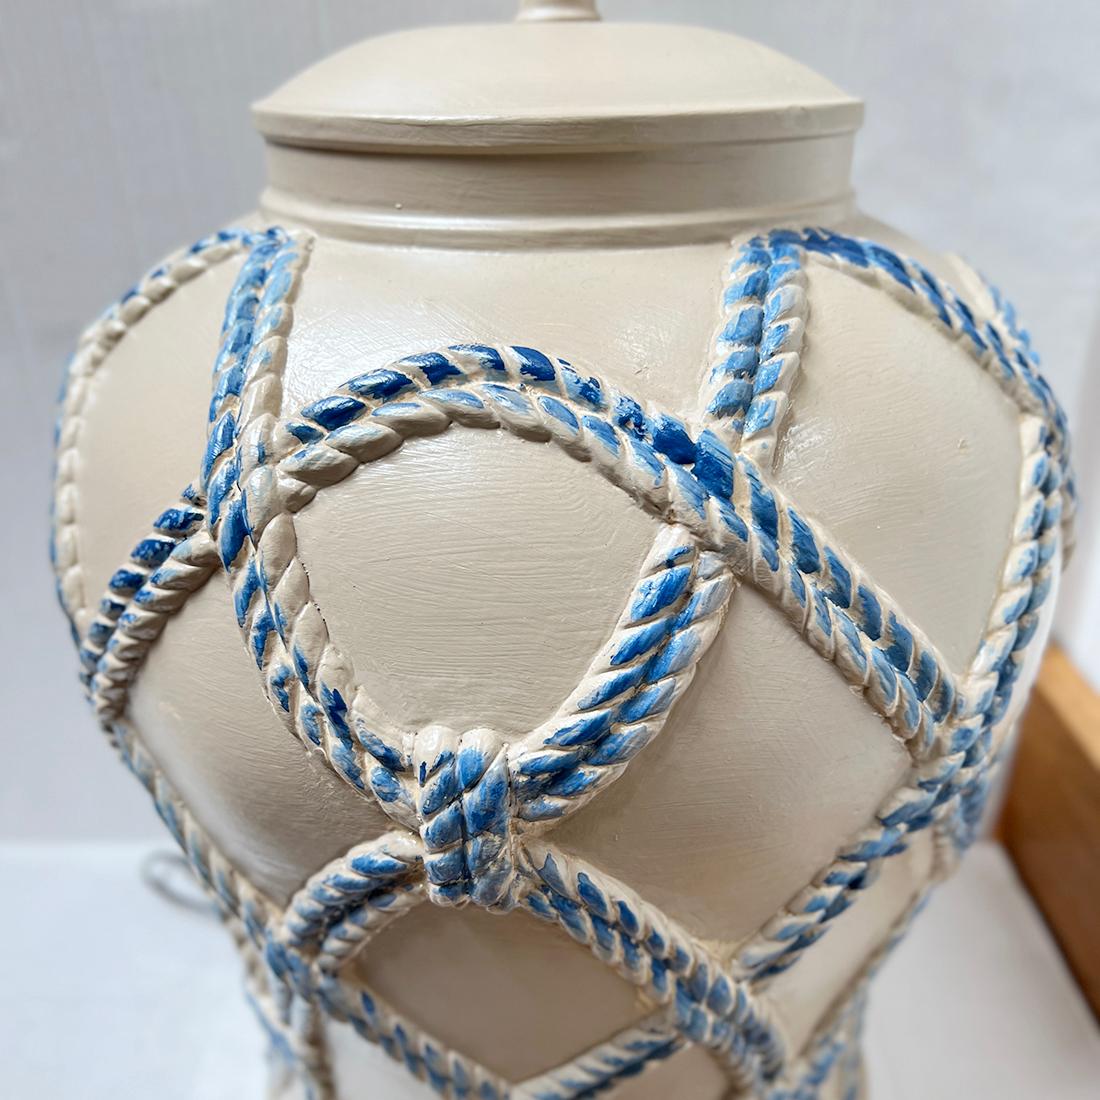 Pair of 1960's nautical table lamps with blue details.

Measurements:
Height of body: 19